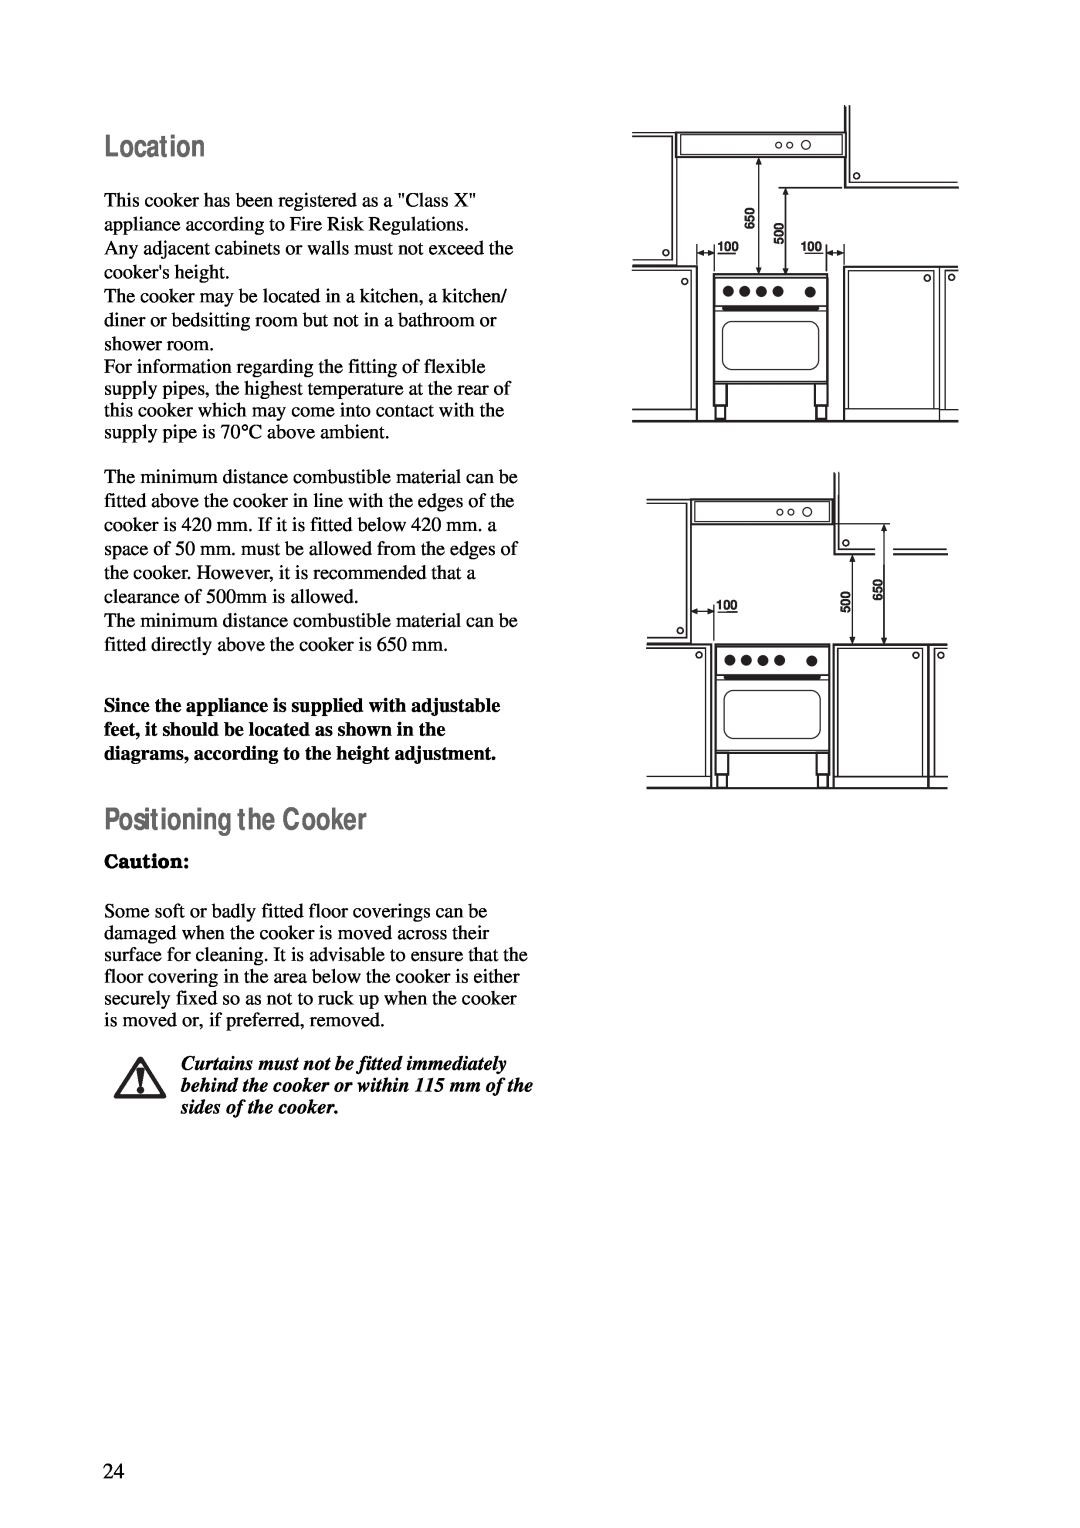 Zanussi ZCM 700 X manual Location, Positioning the Cooker 